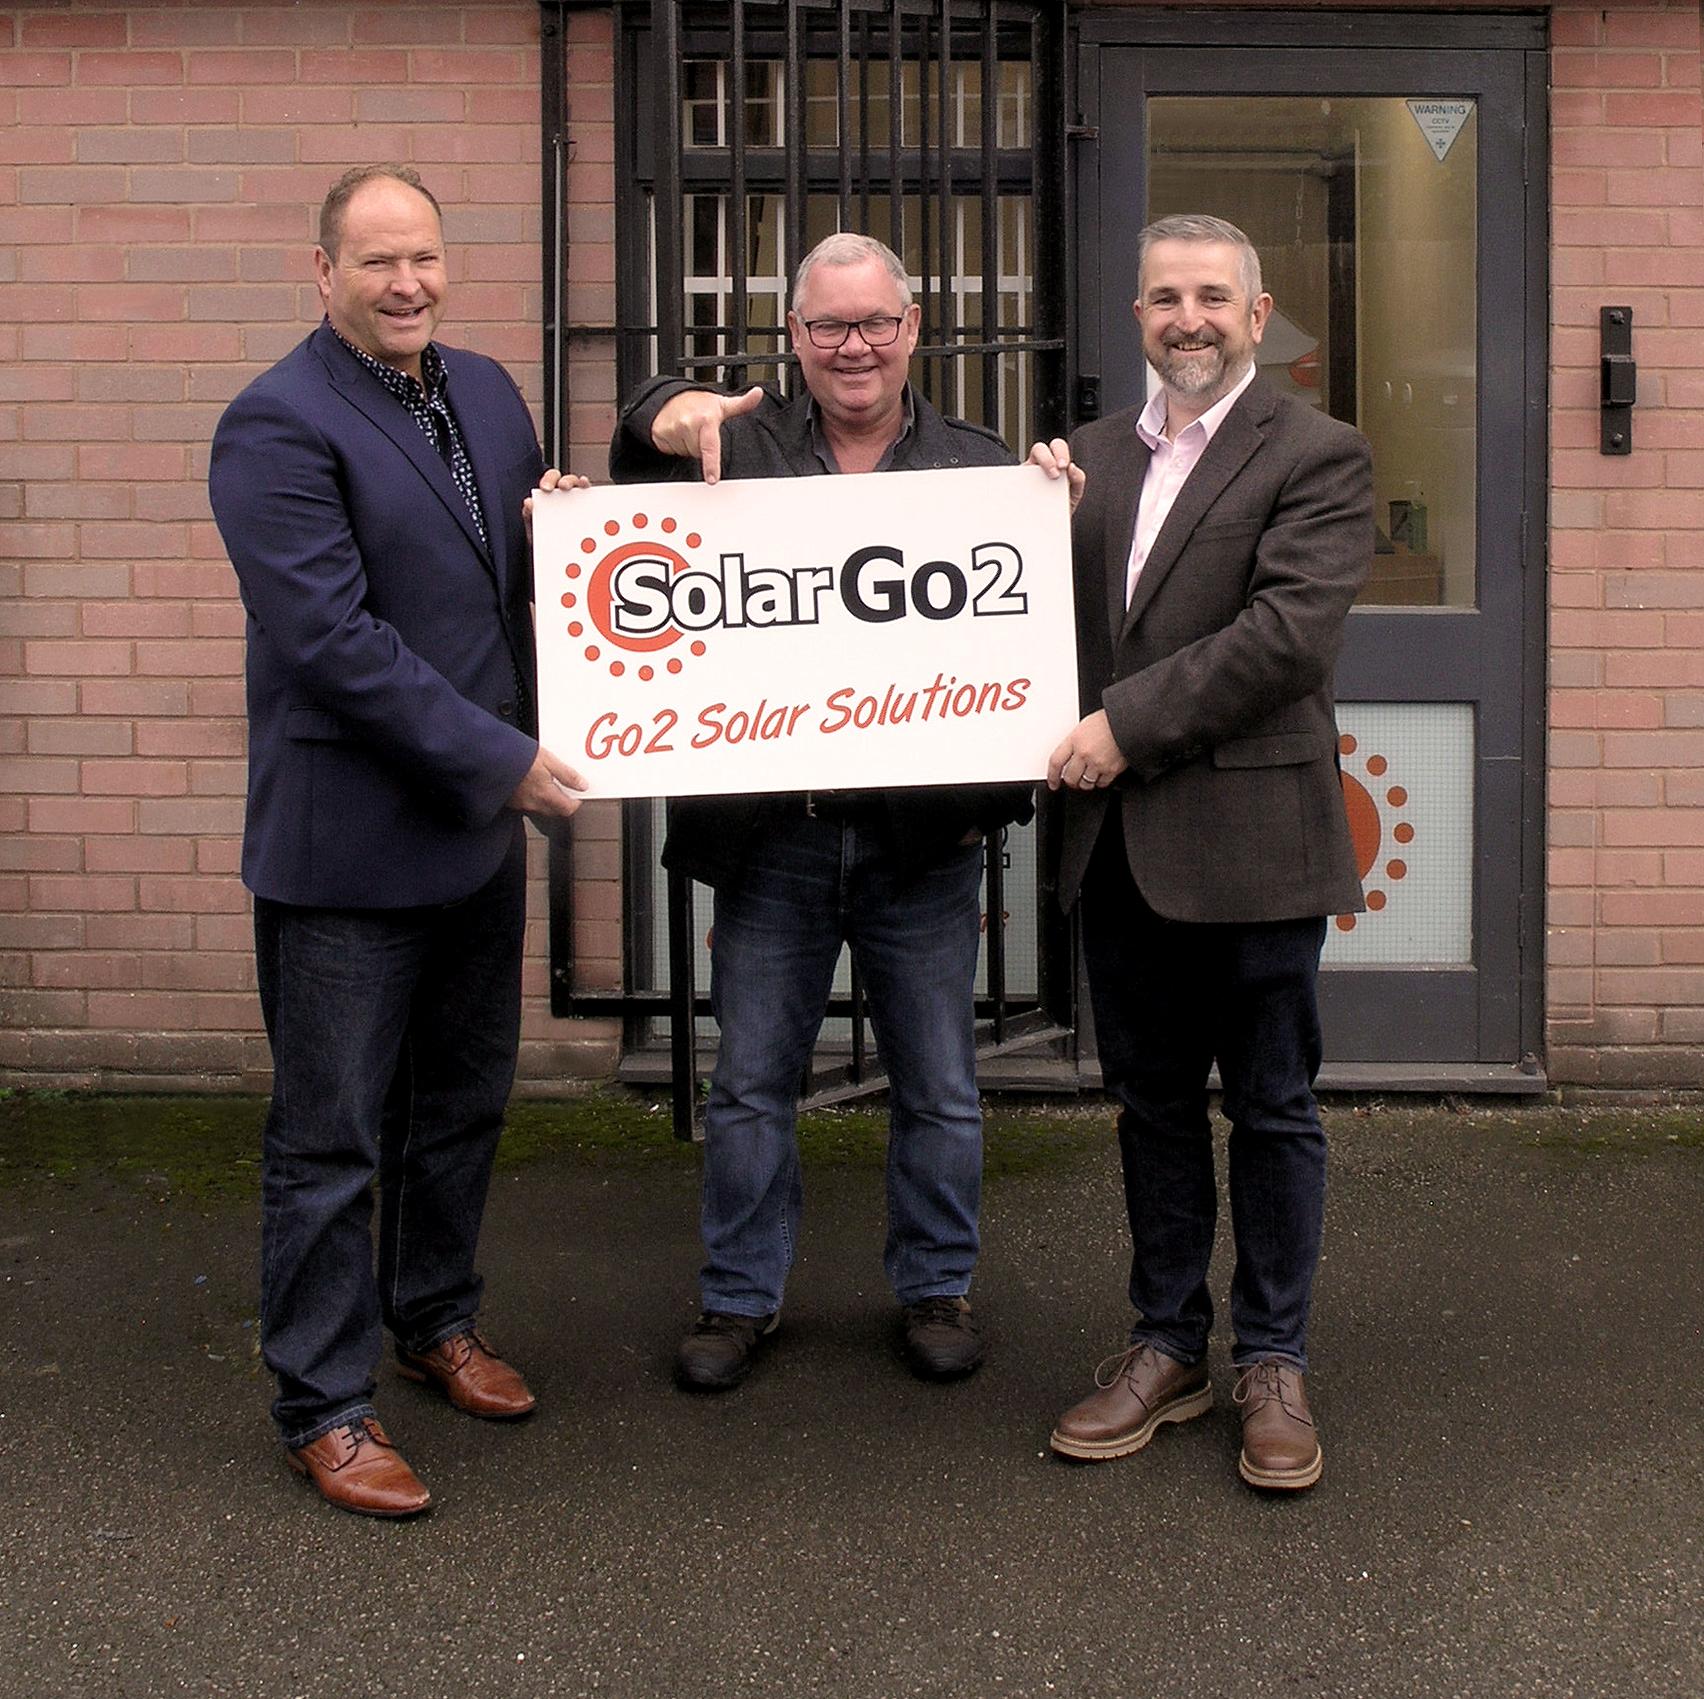 The SolarGo2 team, stood outside their new unit, holding a SolarGo2 sign. The sign reads: SolarGo2 - Go2 Solar Solutions